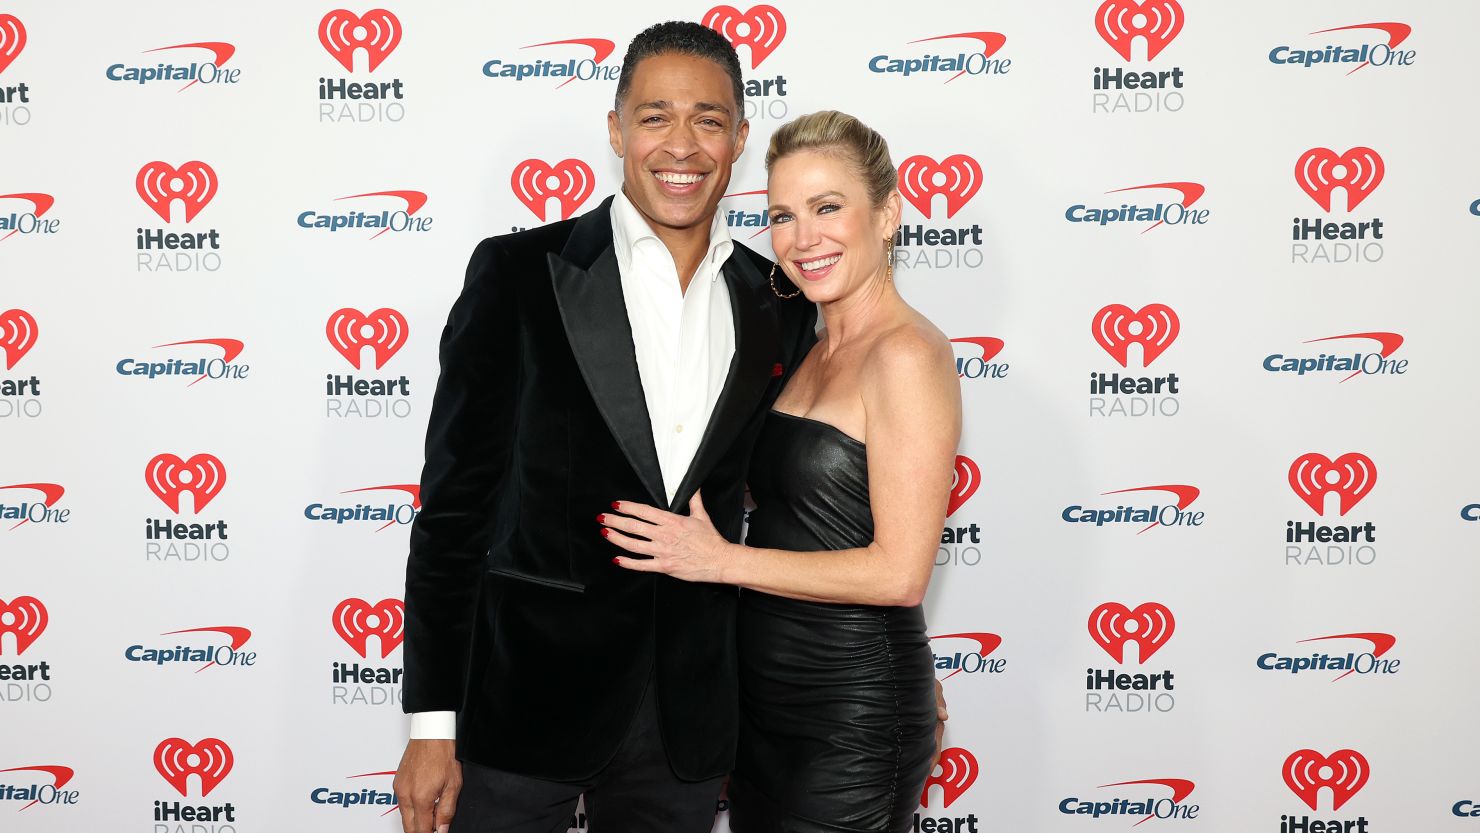 INGLEWOOD, CALIFORNIA - DECEMBER 01: T. J. Holmes and Amy Robach attend KIIS FM's iHeartRadio Jingle Ball 2023 Presented by Capital One at The Kia Forum on December 01, 2023 in Inglewood, California. (Photo by Monica Schipper/Getty Images)